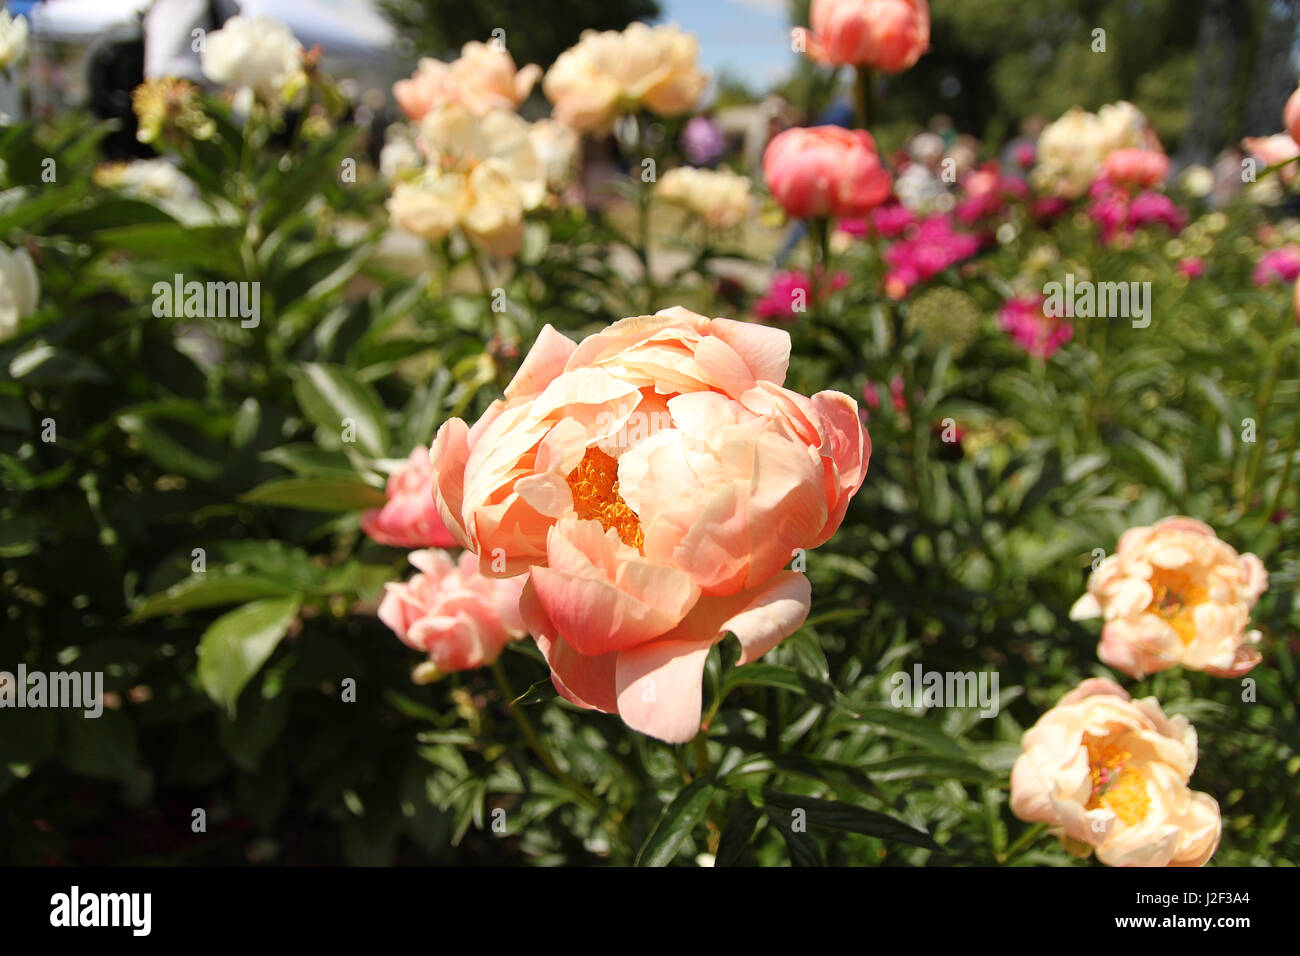 Peonies. A garden bed full of delightful pink, fuchsia and coral pink peonies in contrast with greenery and the sky in early June. Stock Photo